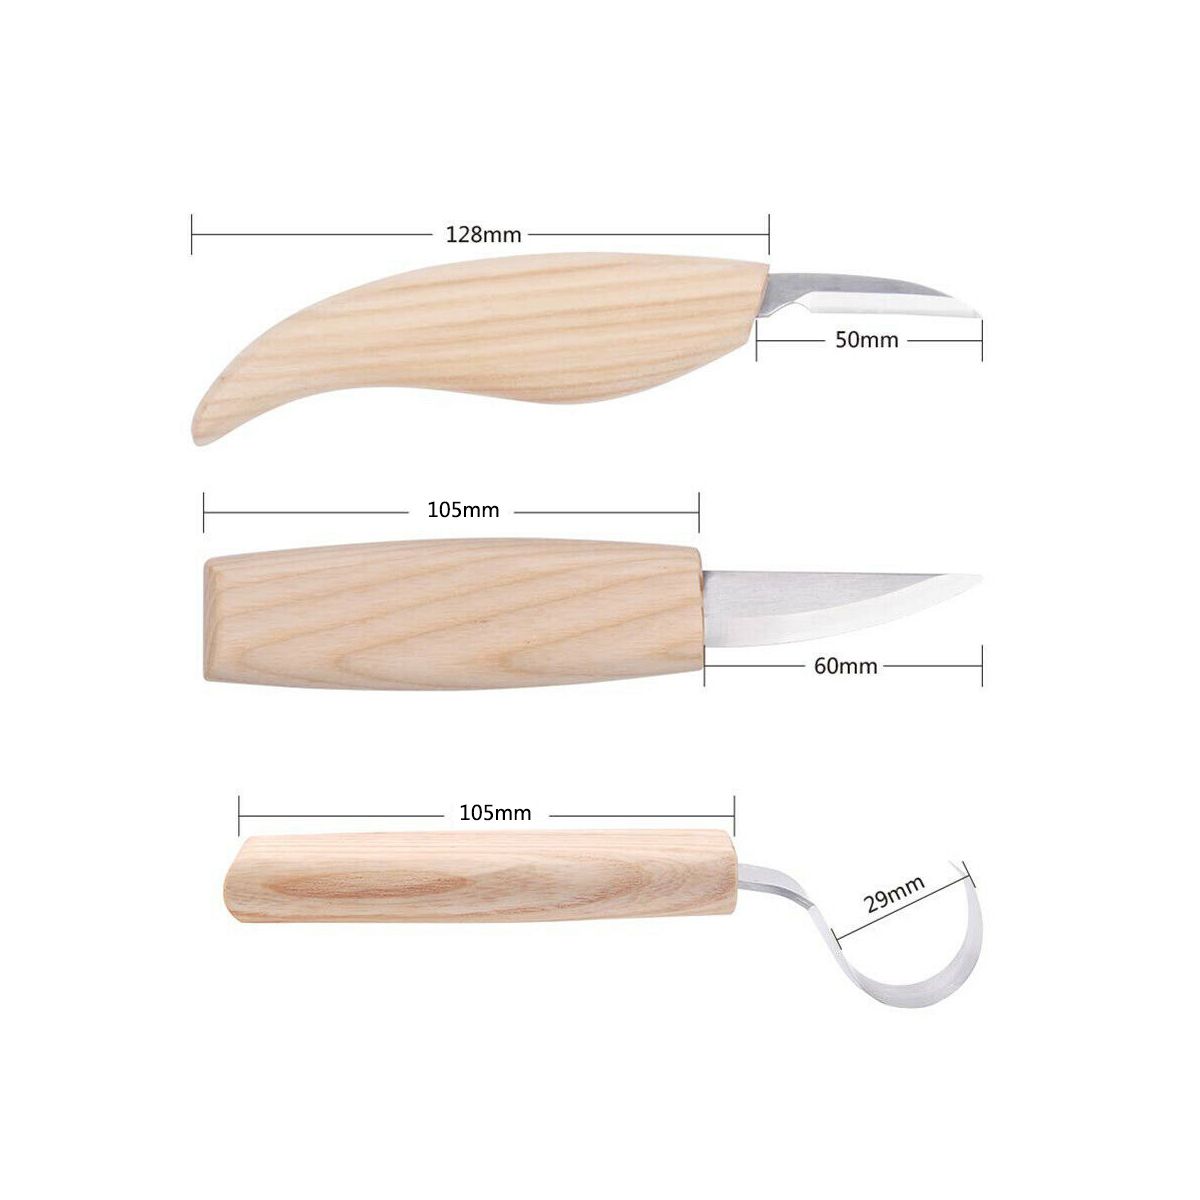 3Pcs-Spoon-Wood-Carving-Whittling-Chisel-Woodworking-Cutter-DIY-Hand-Tool-1565889